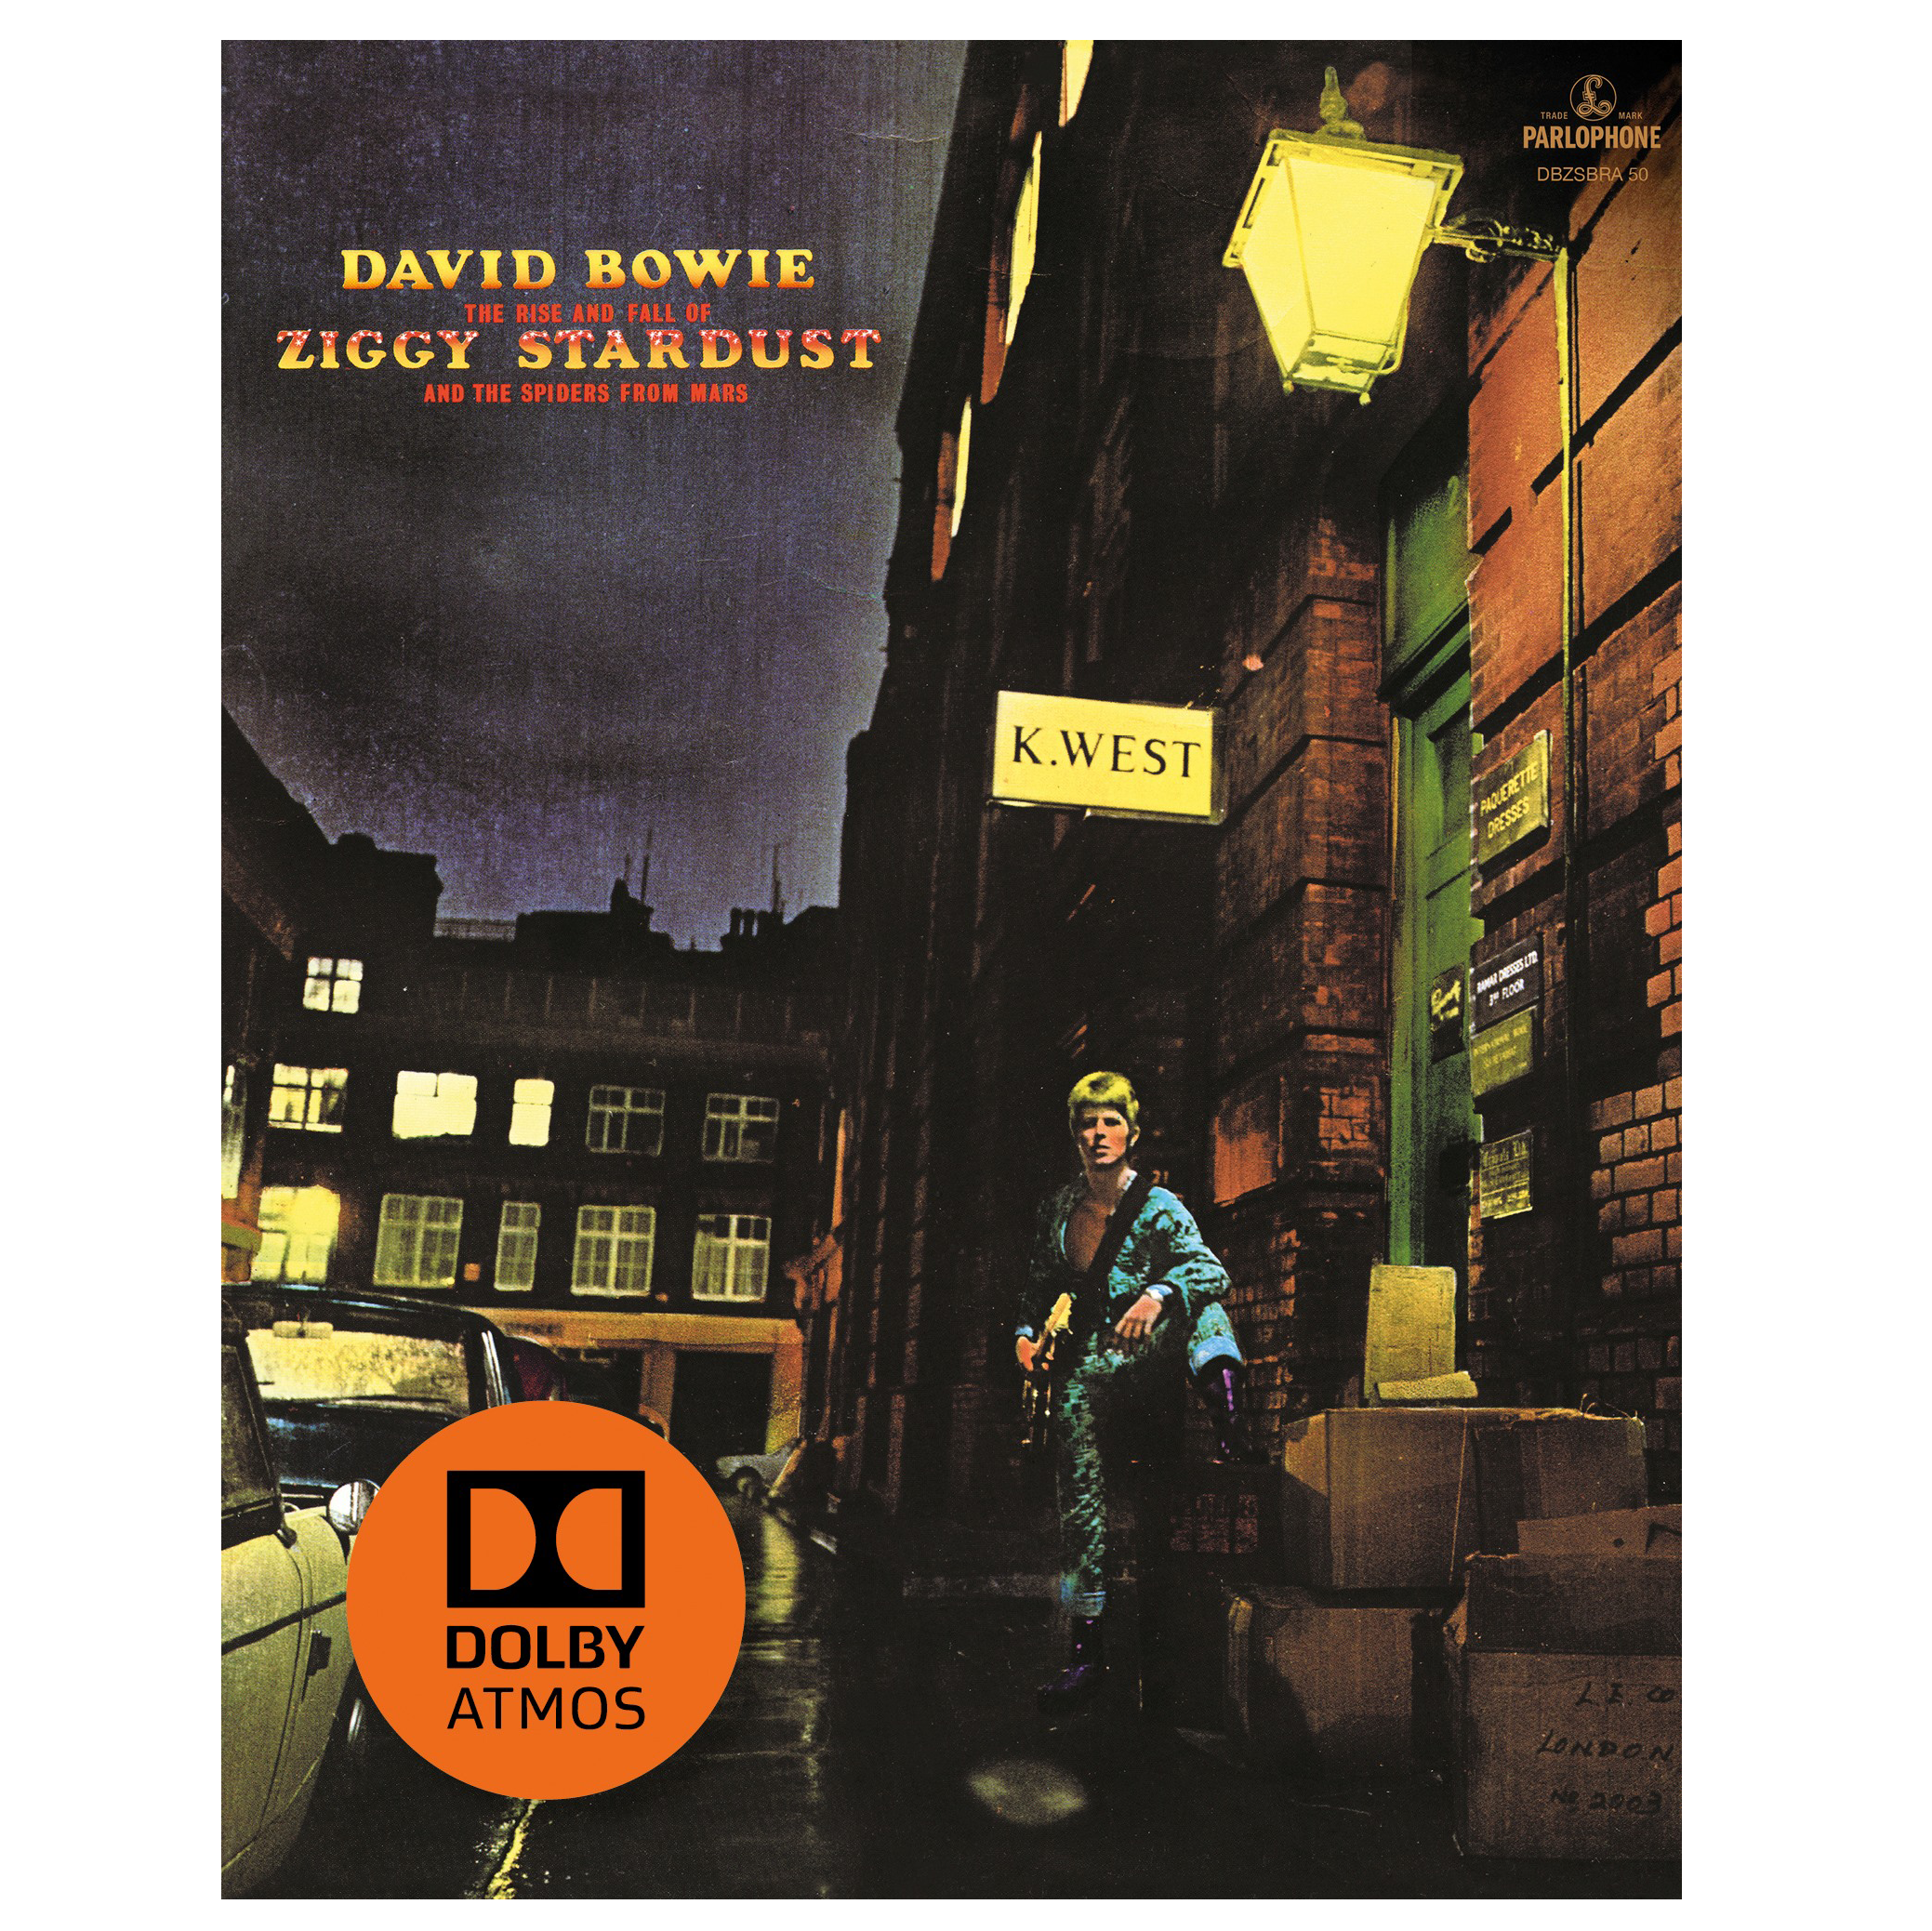 David Bowie - The Rise and Fall of Ziggy Stardust and the Spiders from Mars: Blu-Ray Audio CD